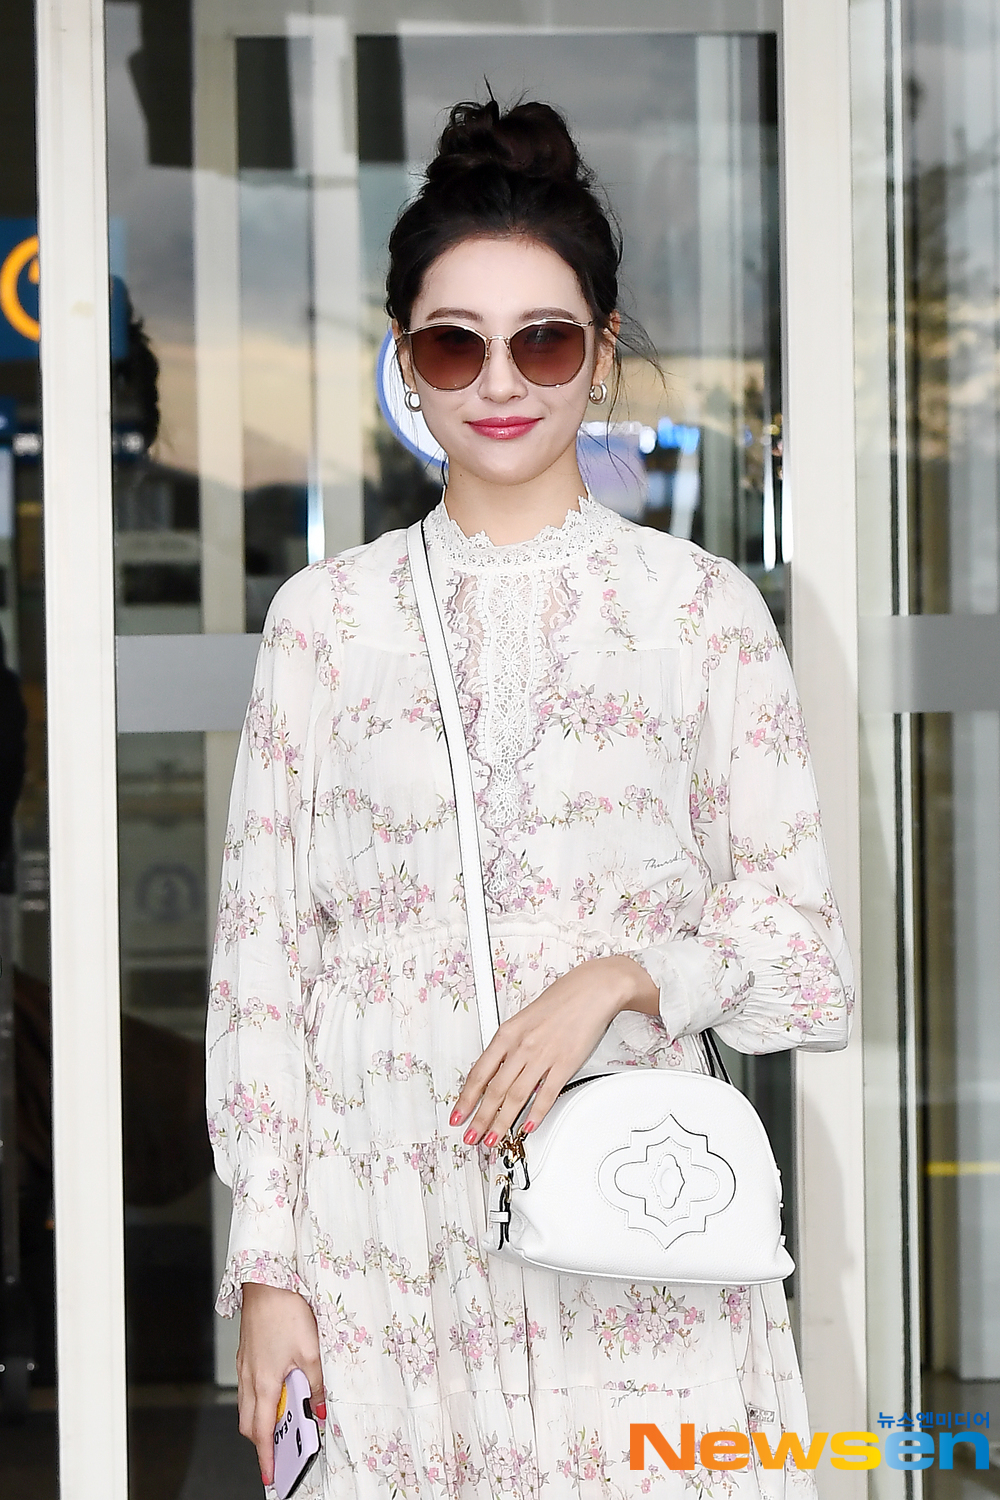 Singer Sunmi (SUNMI) departed for United States of America Los Angeles, a photo shoot car, on April 26 at the Incheon International Airport in Unseo-dong, Jung-gu, Incheon.Singer Sunmi (SUNMI) is leaving for United States of America Los Angeles with an airport fashion show.exponential earthquake